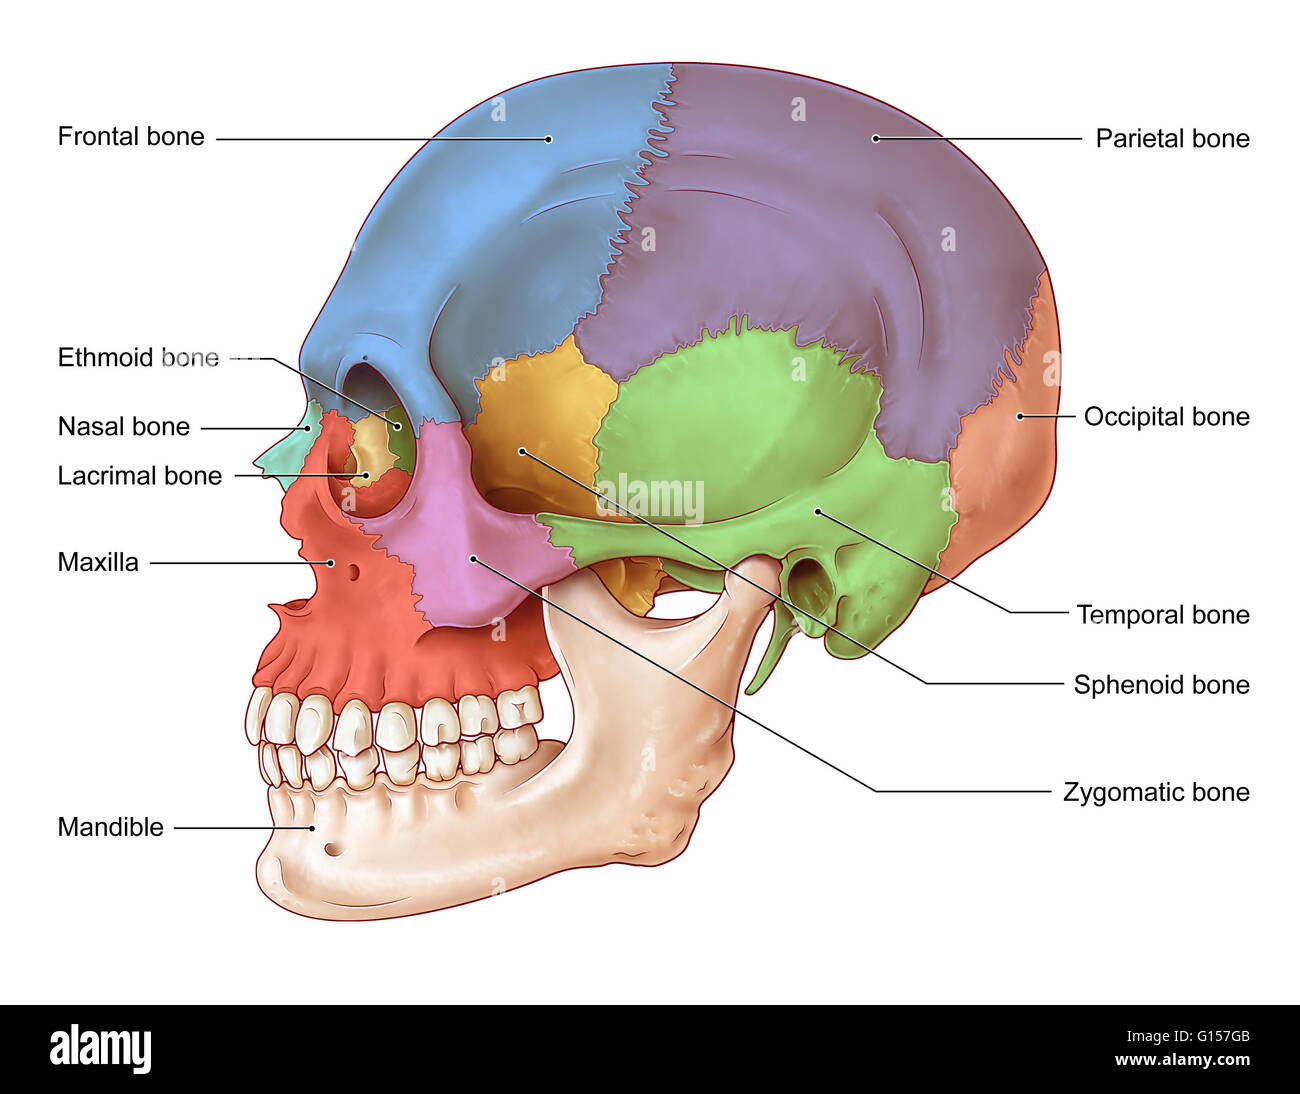 An Illustration Of The Human Skull From A Lateral View The Bones Of